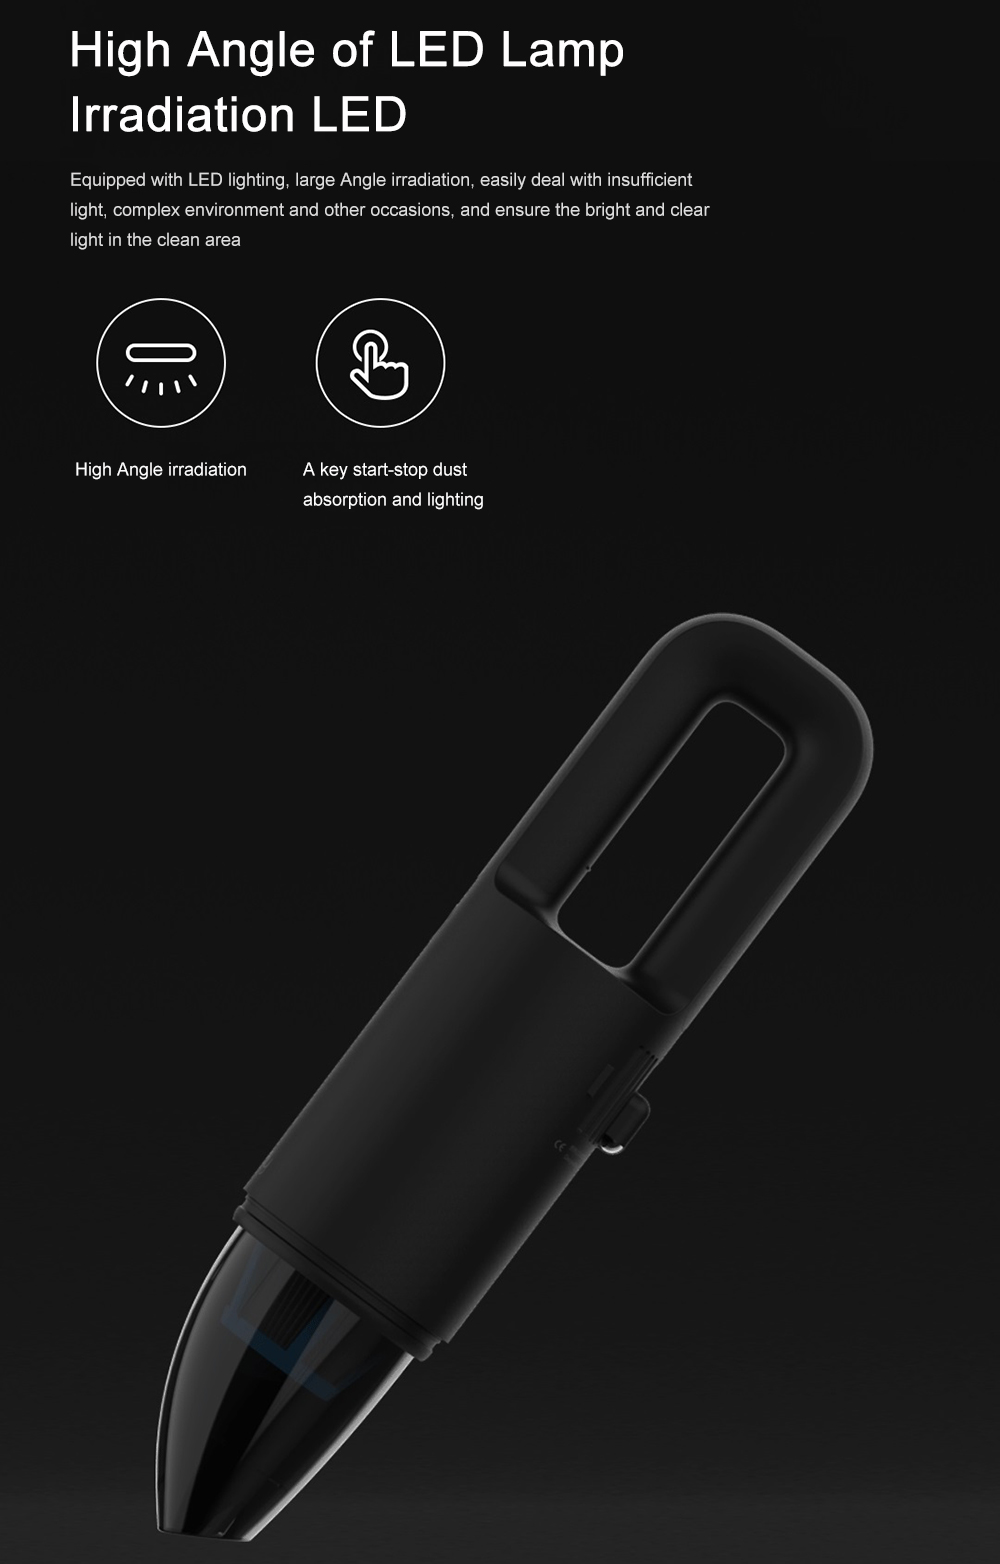 Cleanfly - FVQ Portable Wireless Handheld Vacuum Cleaner with Car Charger from Xiaomi Youpin